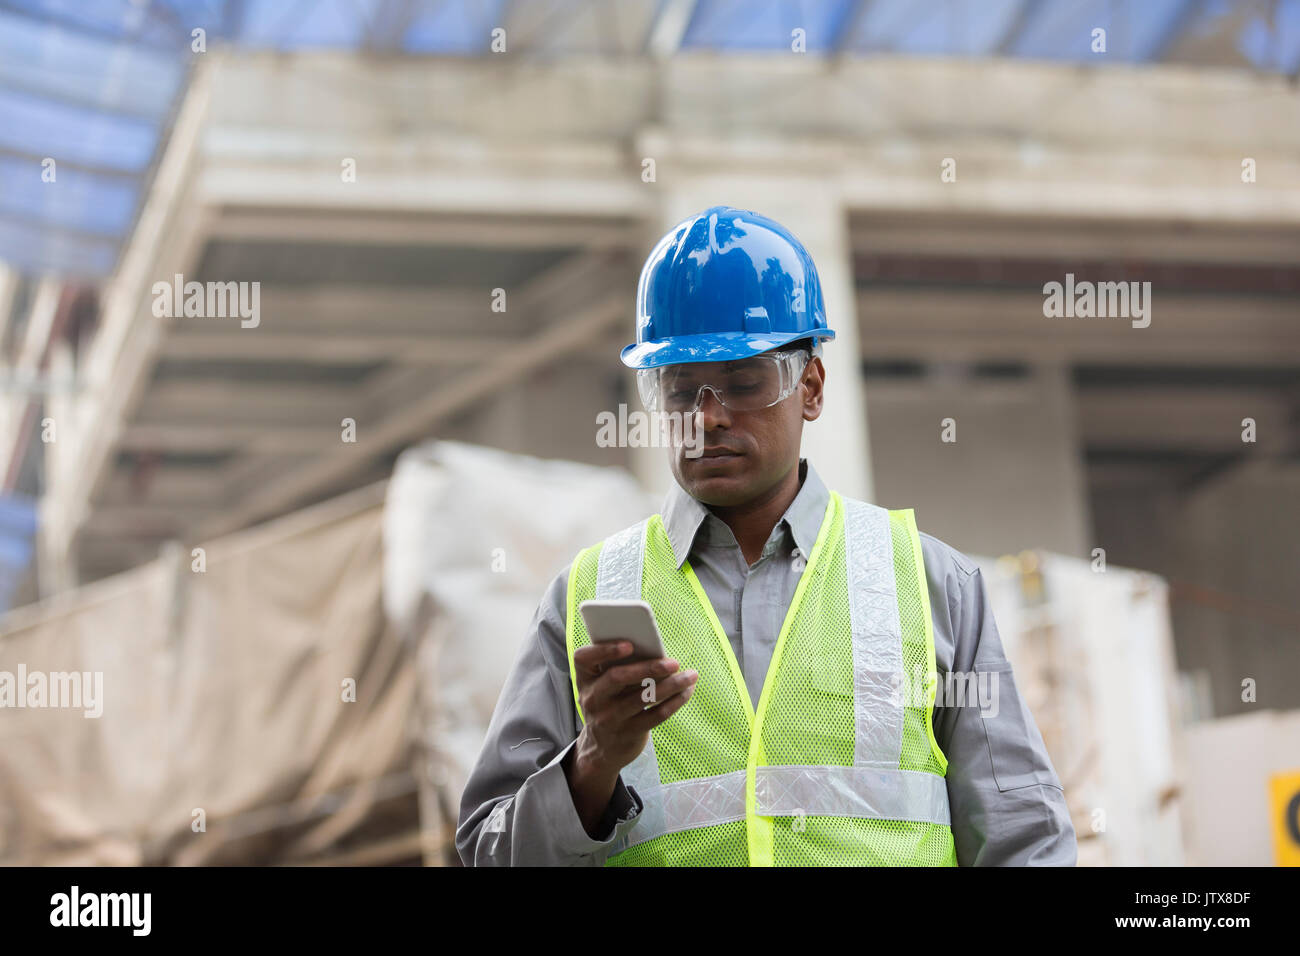 Portrait of a male Indian builder or industrial engineer at work using phone. Stock Photo